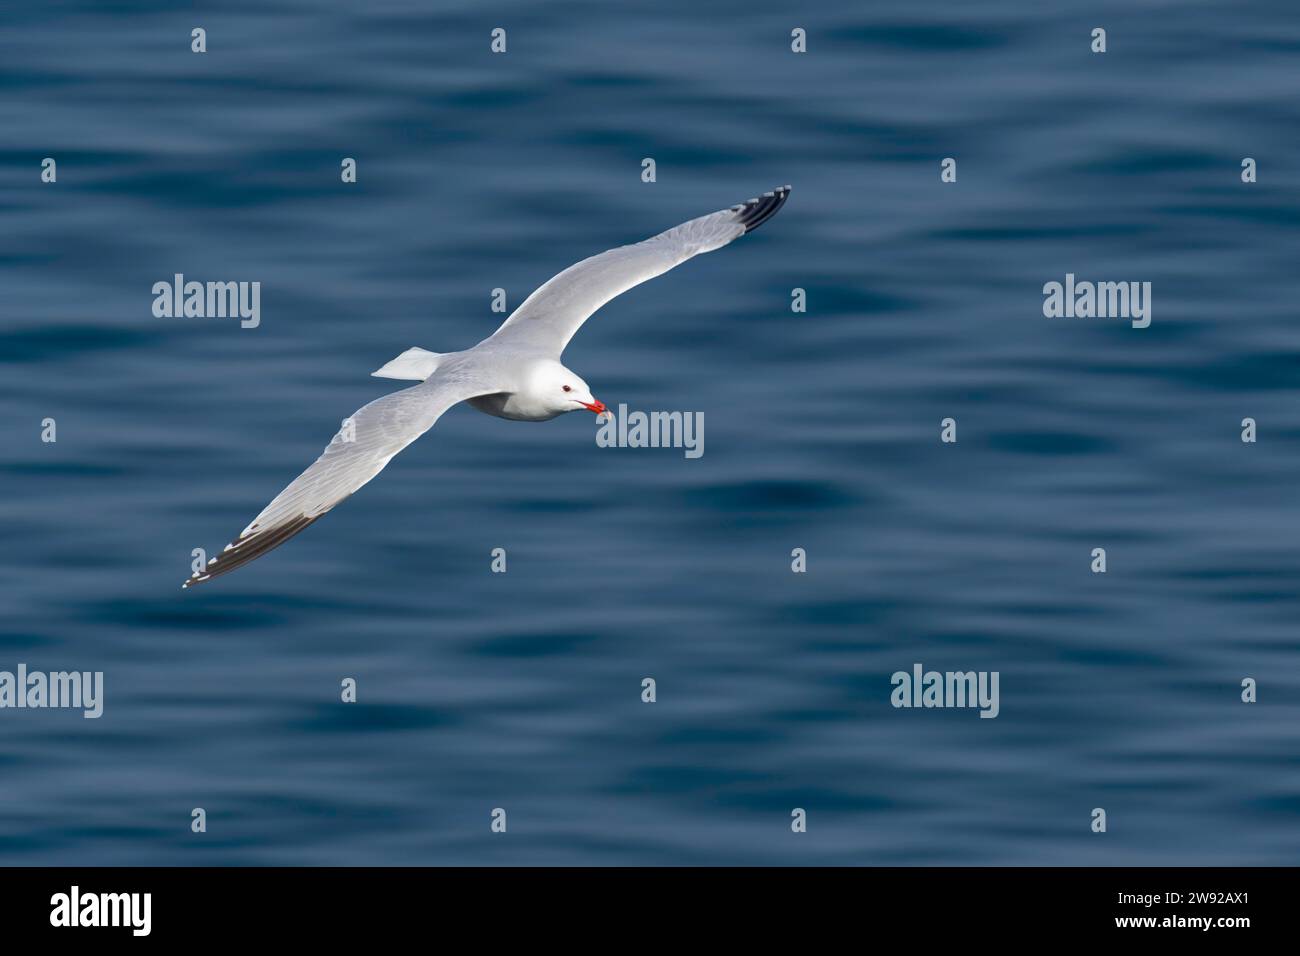 A seagull in flight over the calm blue water Stock Photo